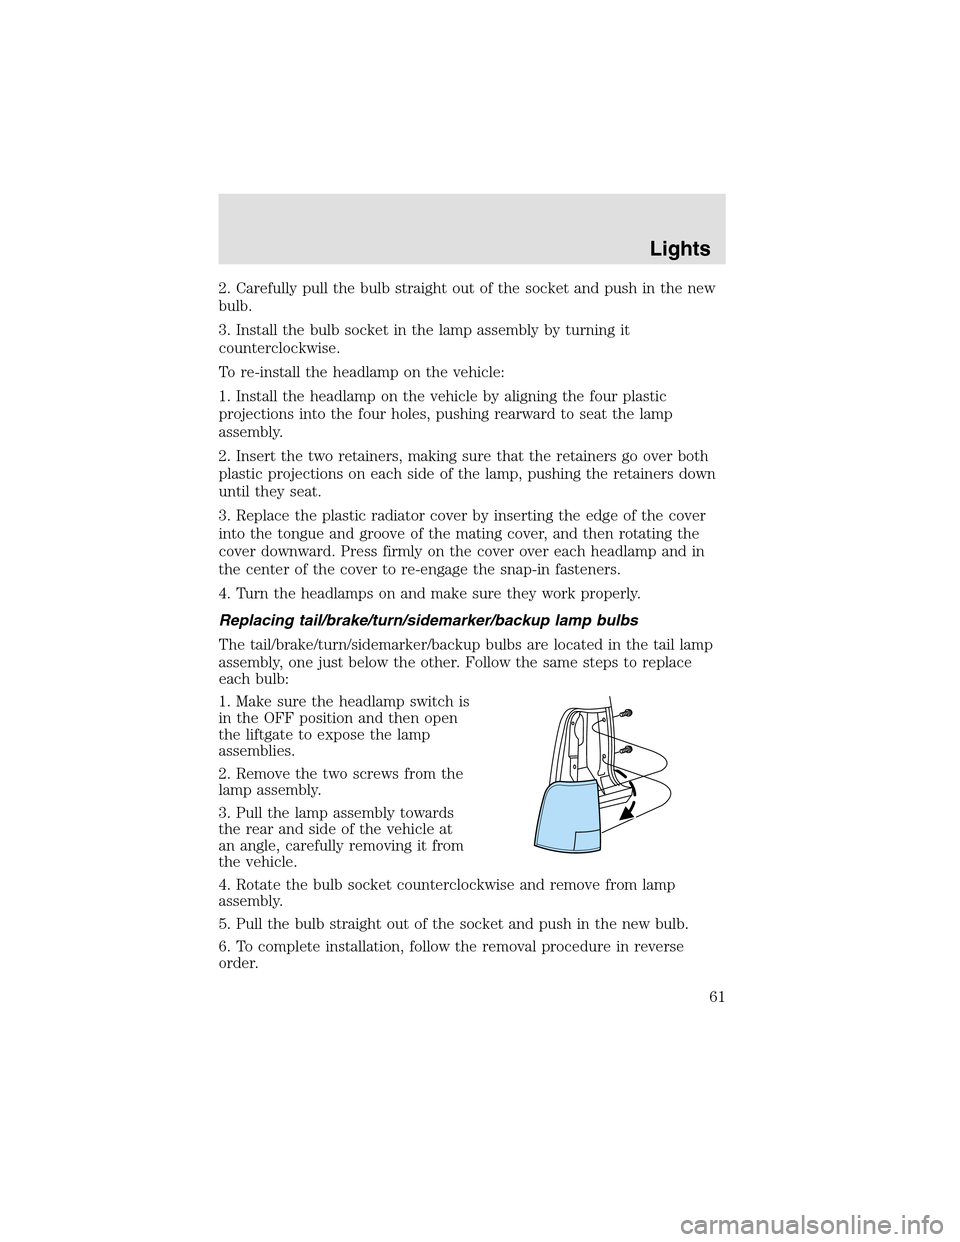 LINCOLN AVIATOR 2003  Owners Manual 2. Carefully pull the bulb straight out of the socket and push in the new
bulb.
3. Install the bulb socket in the lampassembly by turning it
counterclockwise.
To re-install the headlampon the vehicle: